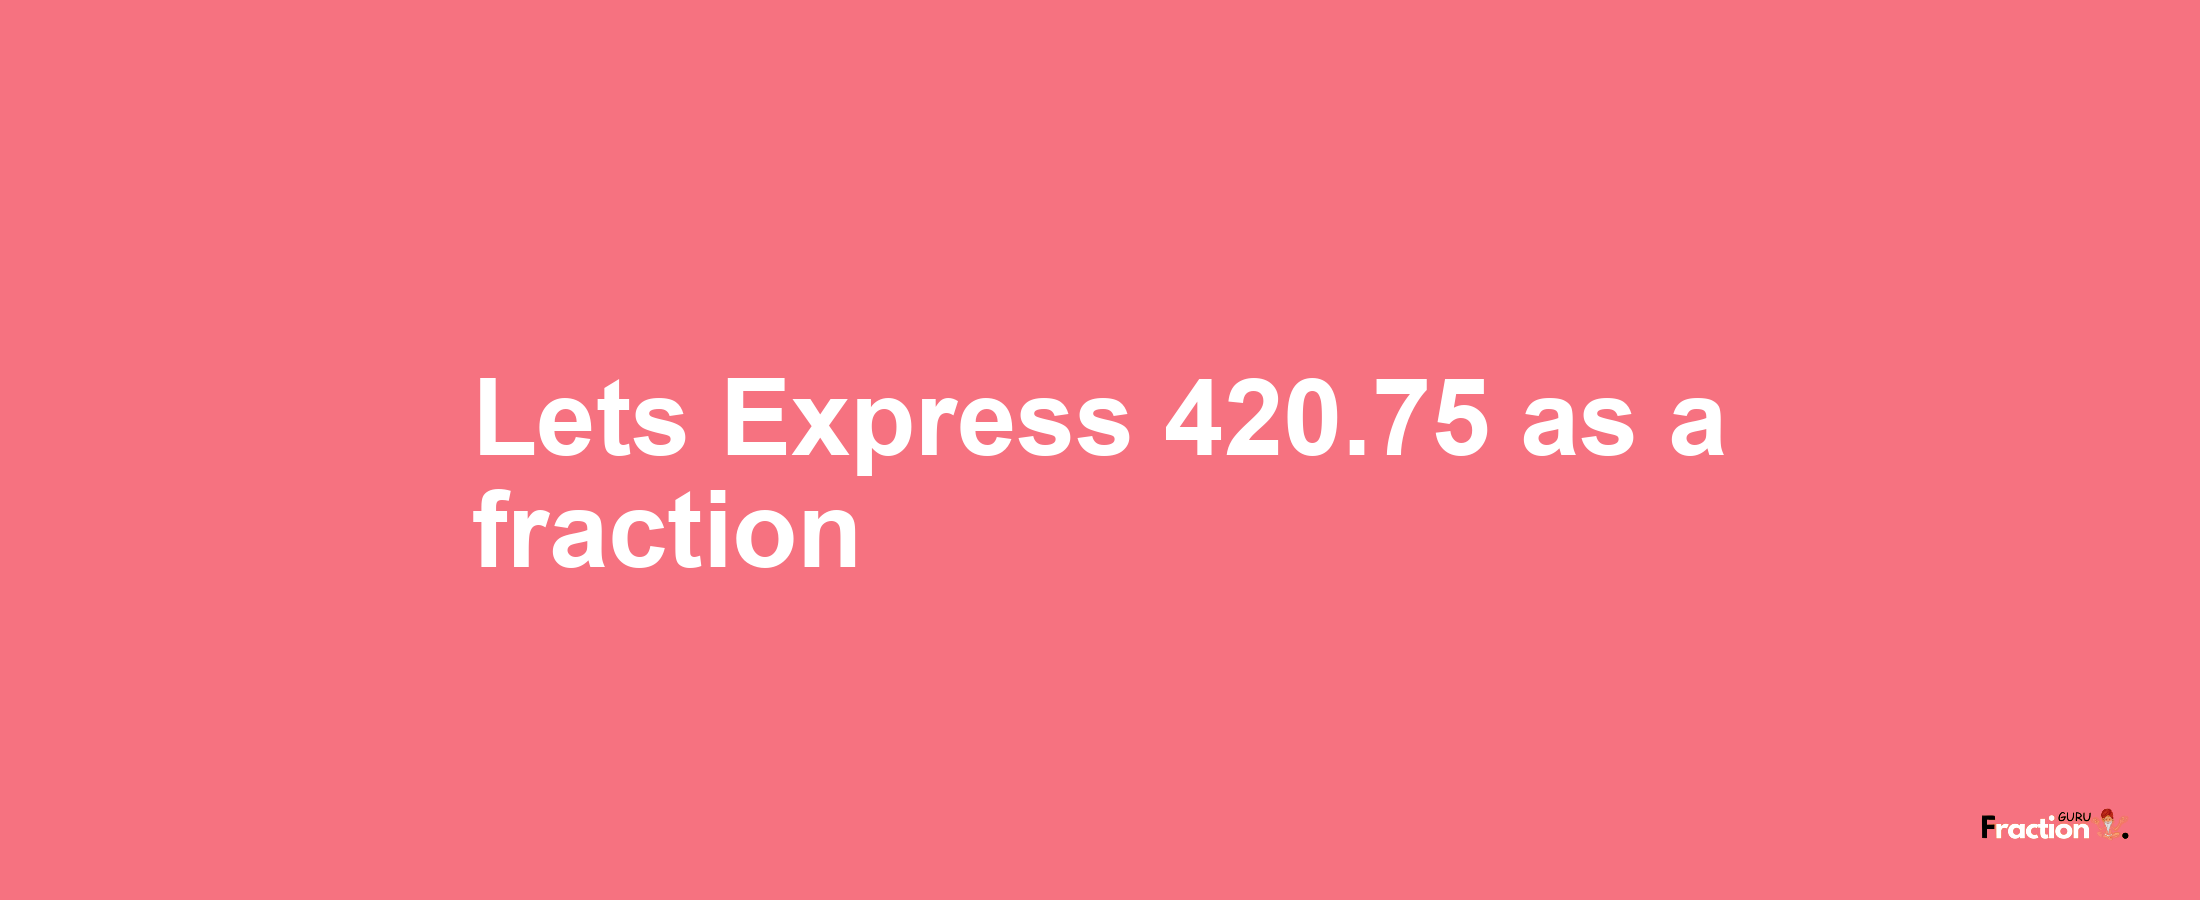 Lets Express 420.75 as afraction